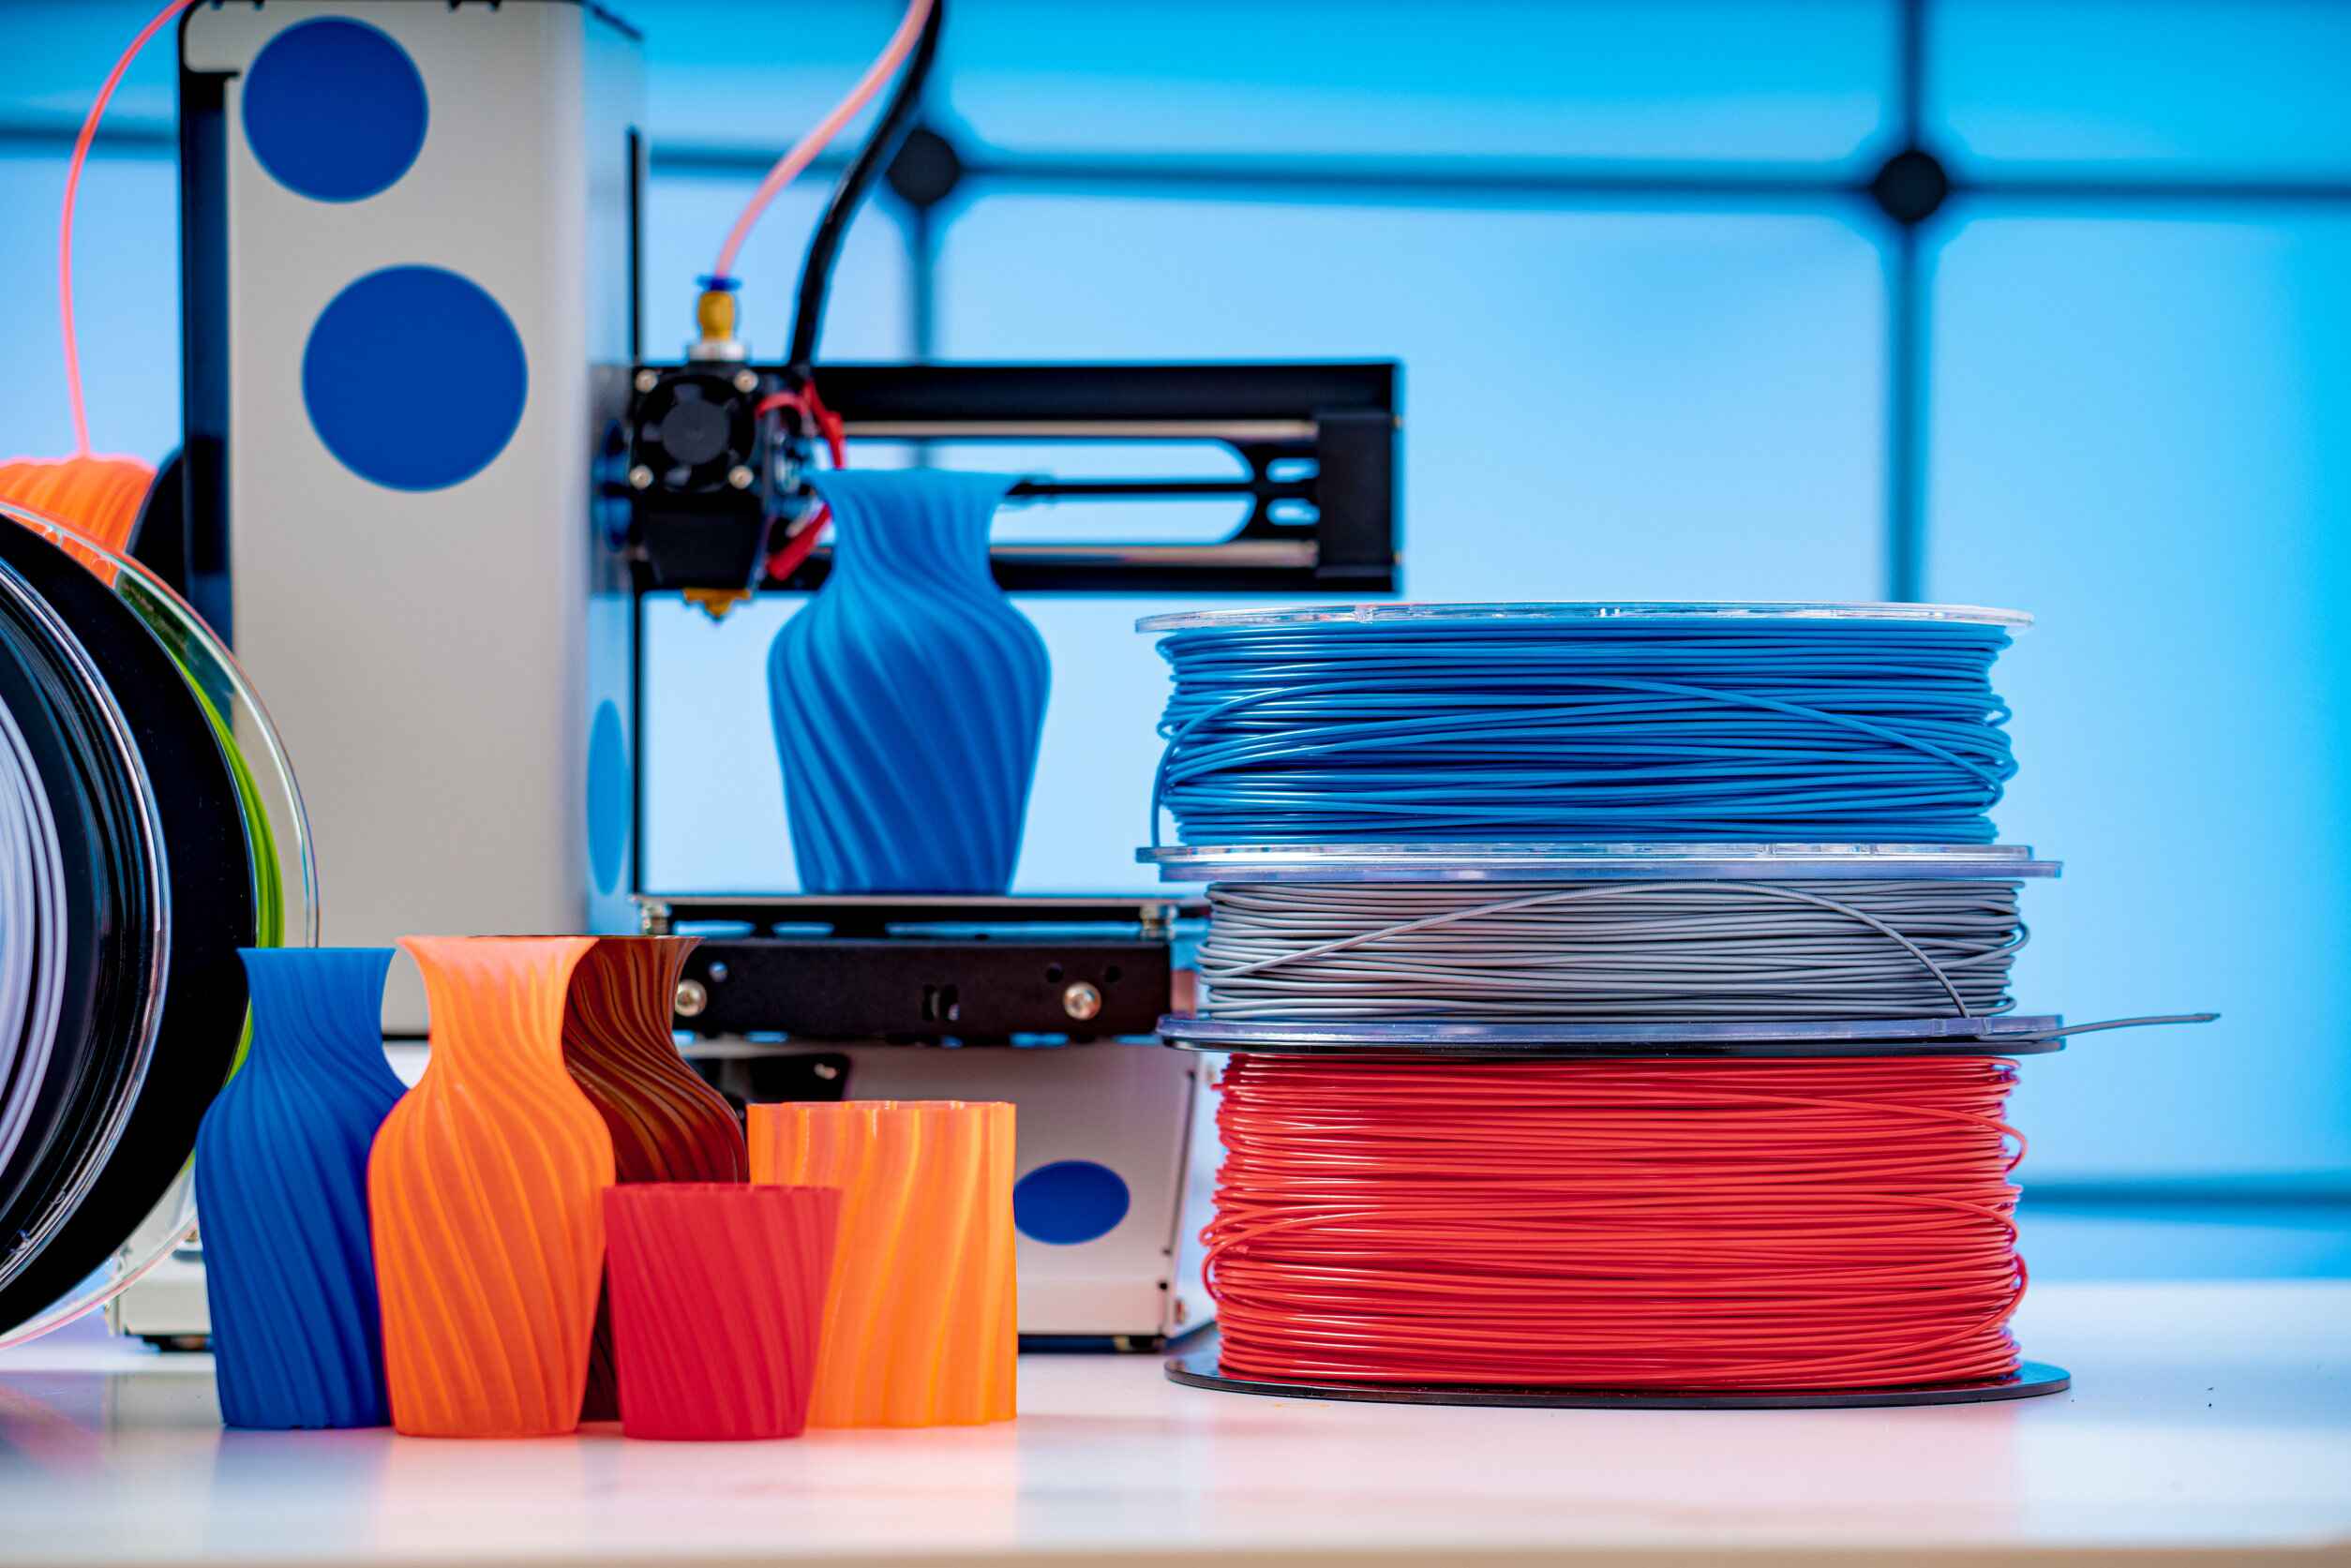 What Type Of Plastic Does A 3D Printer Use